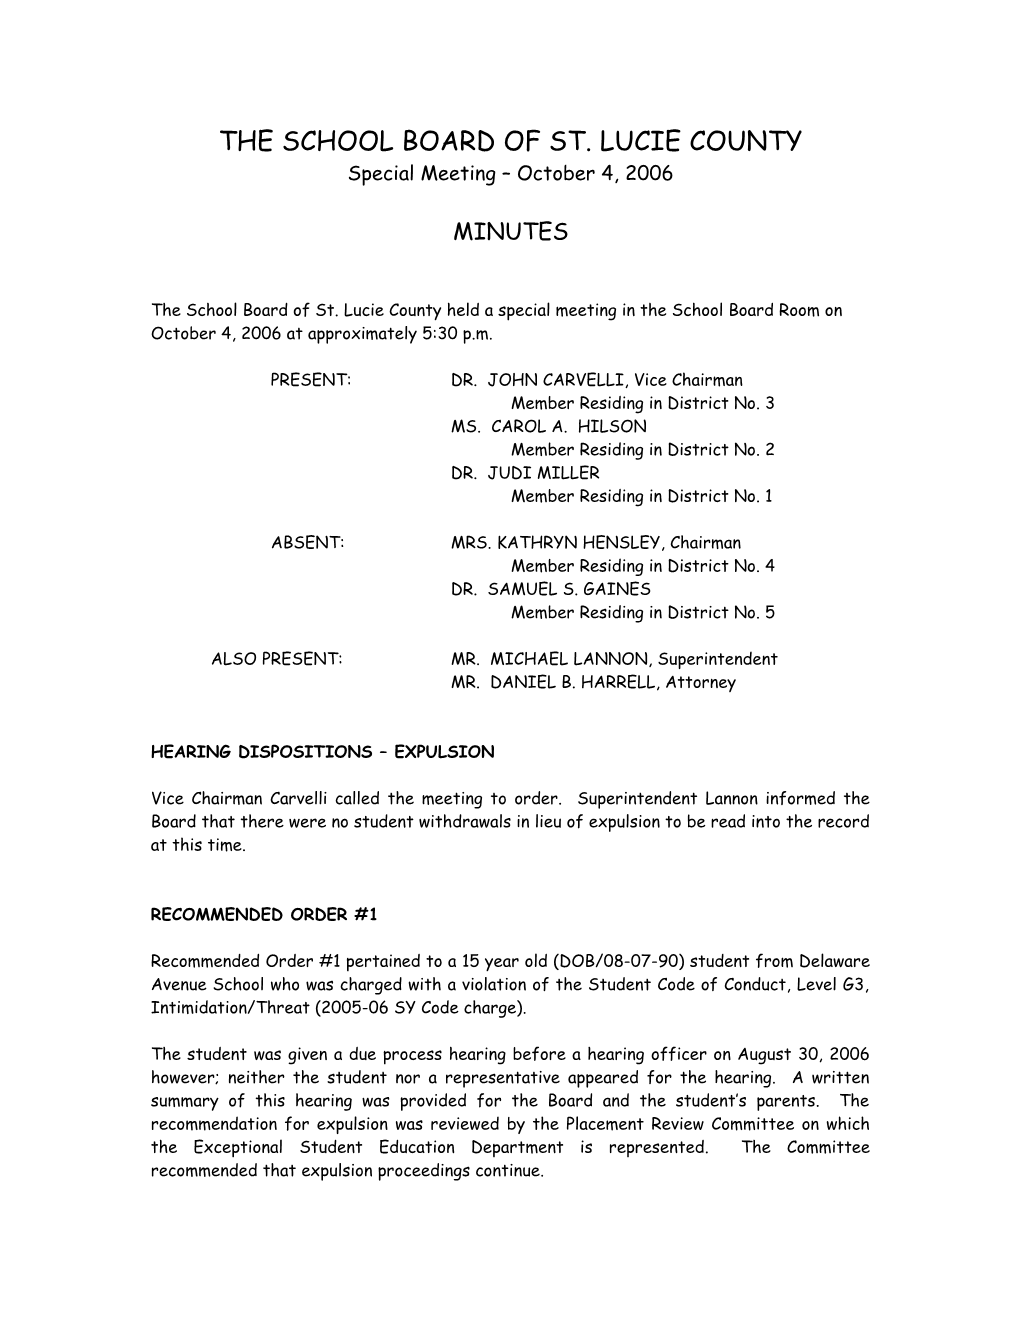 10-04-06 SLCSB Expulsion Meeting Minutes - Approved 10-10-06